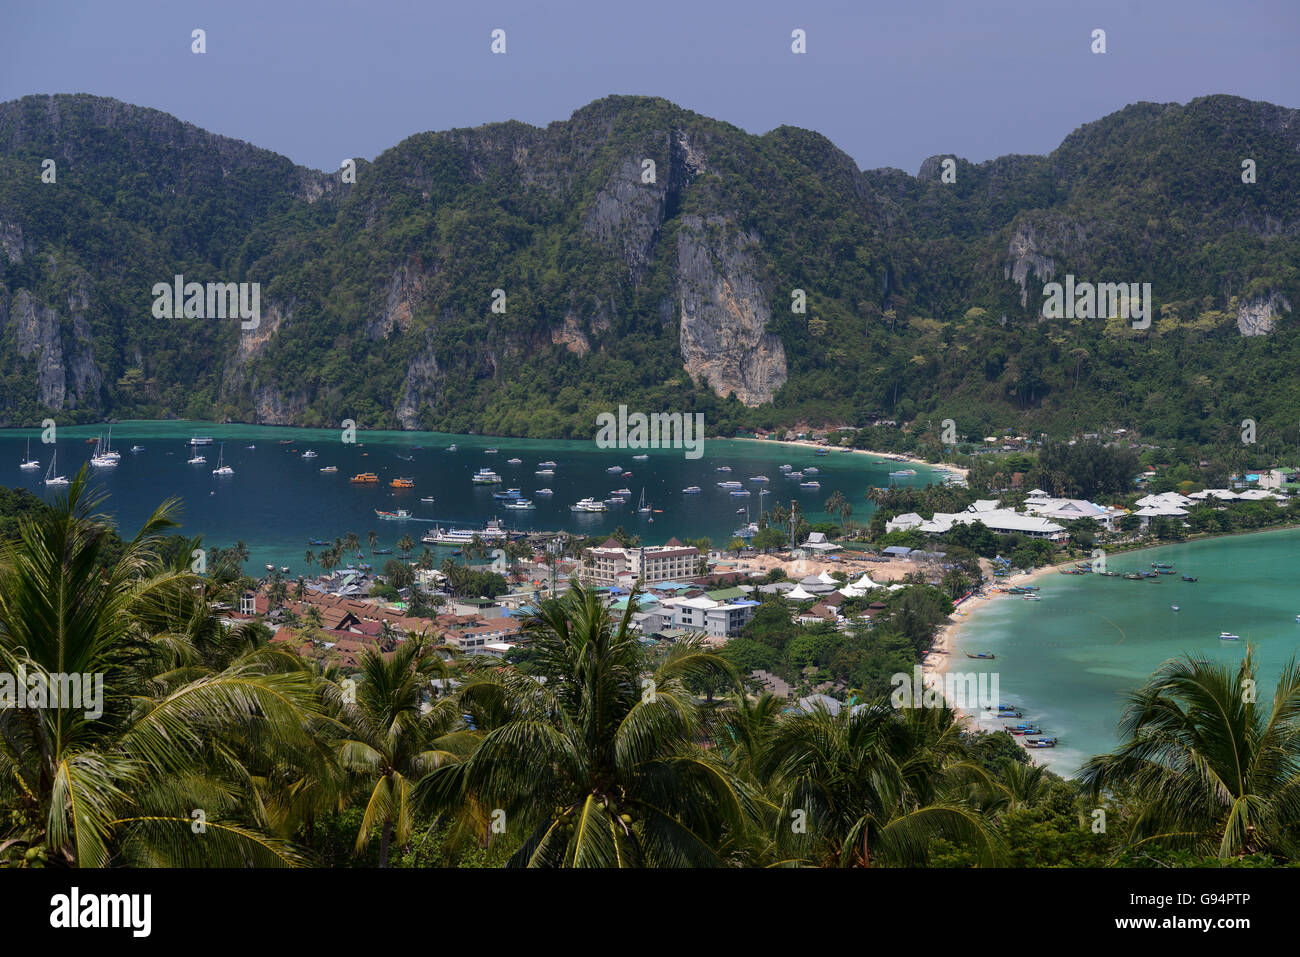 The view from the Viewpoint on the Town of Ko PhiPhi on Ko Phi Phi Island outside of the City of Krabi on the Andaman Sea in the Stock Photo